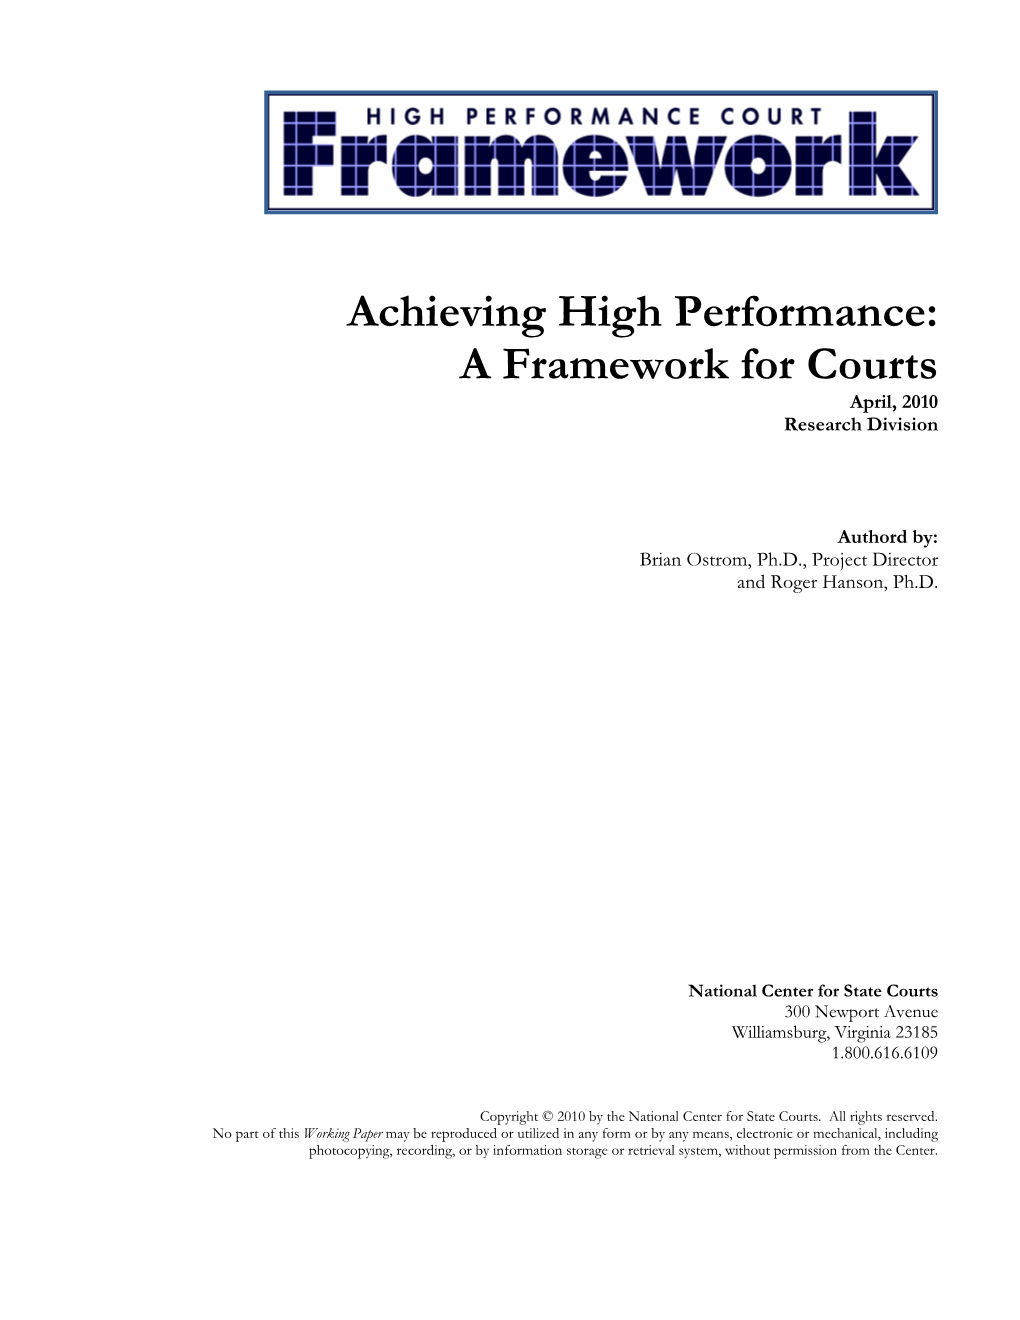 Achieving High Performance: a Framework for Courts April, 2010 Research Division